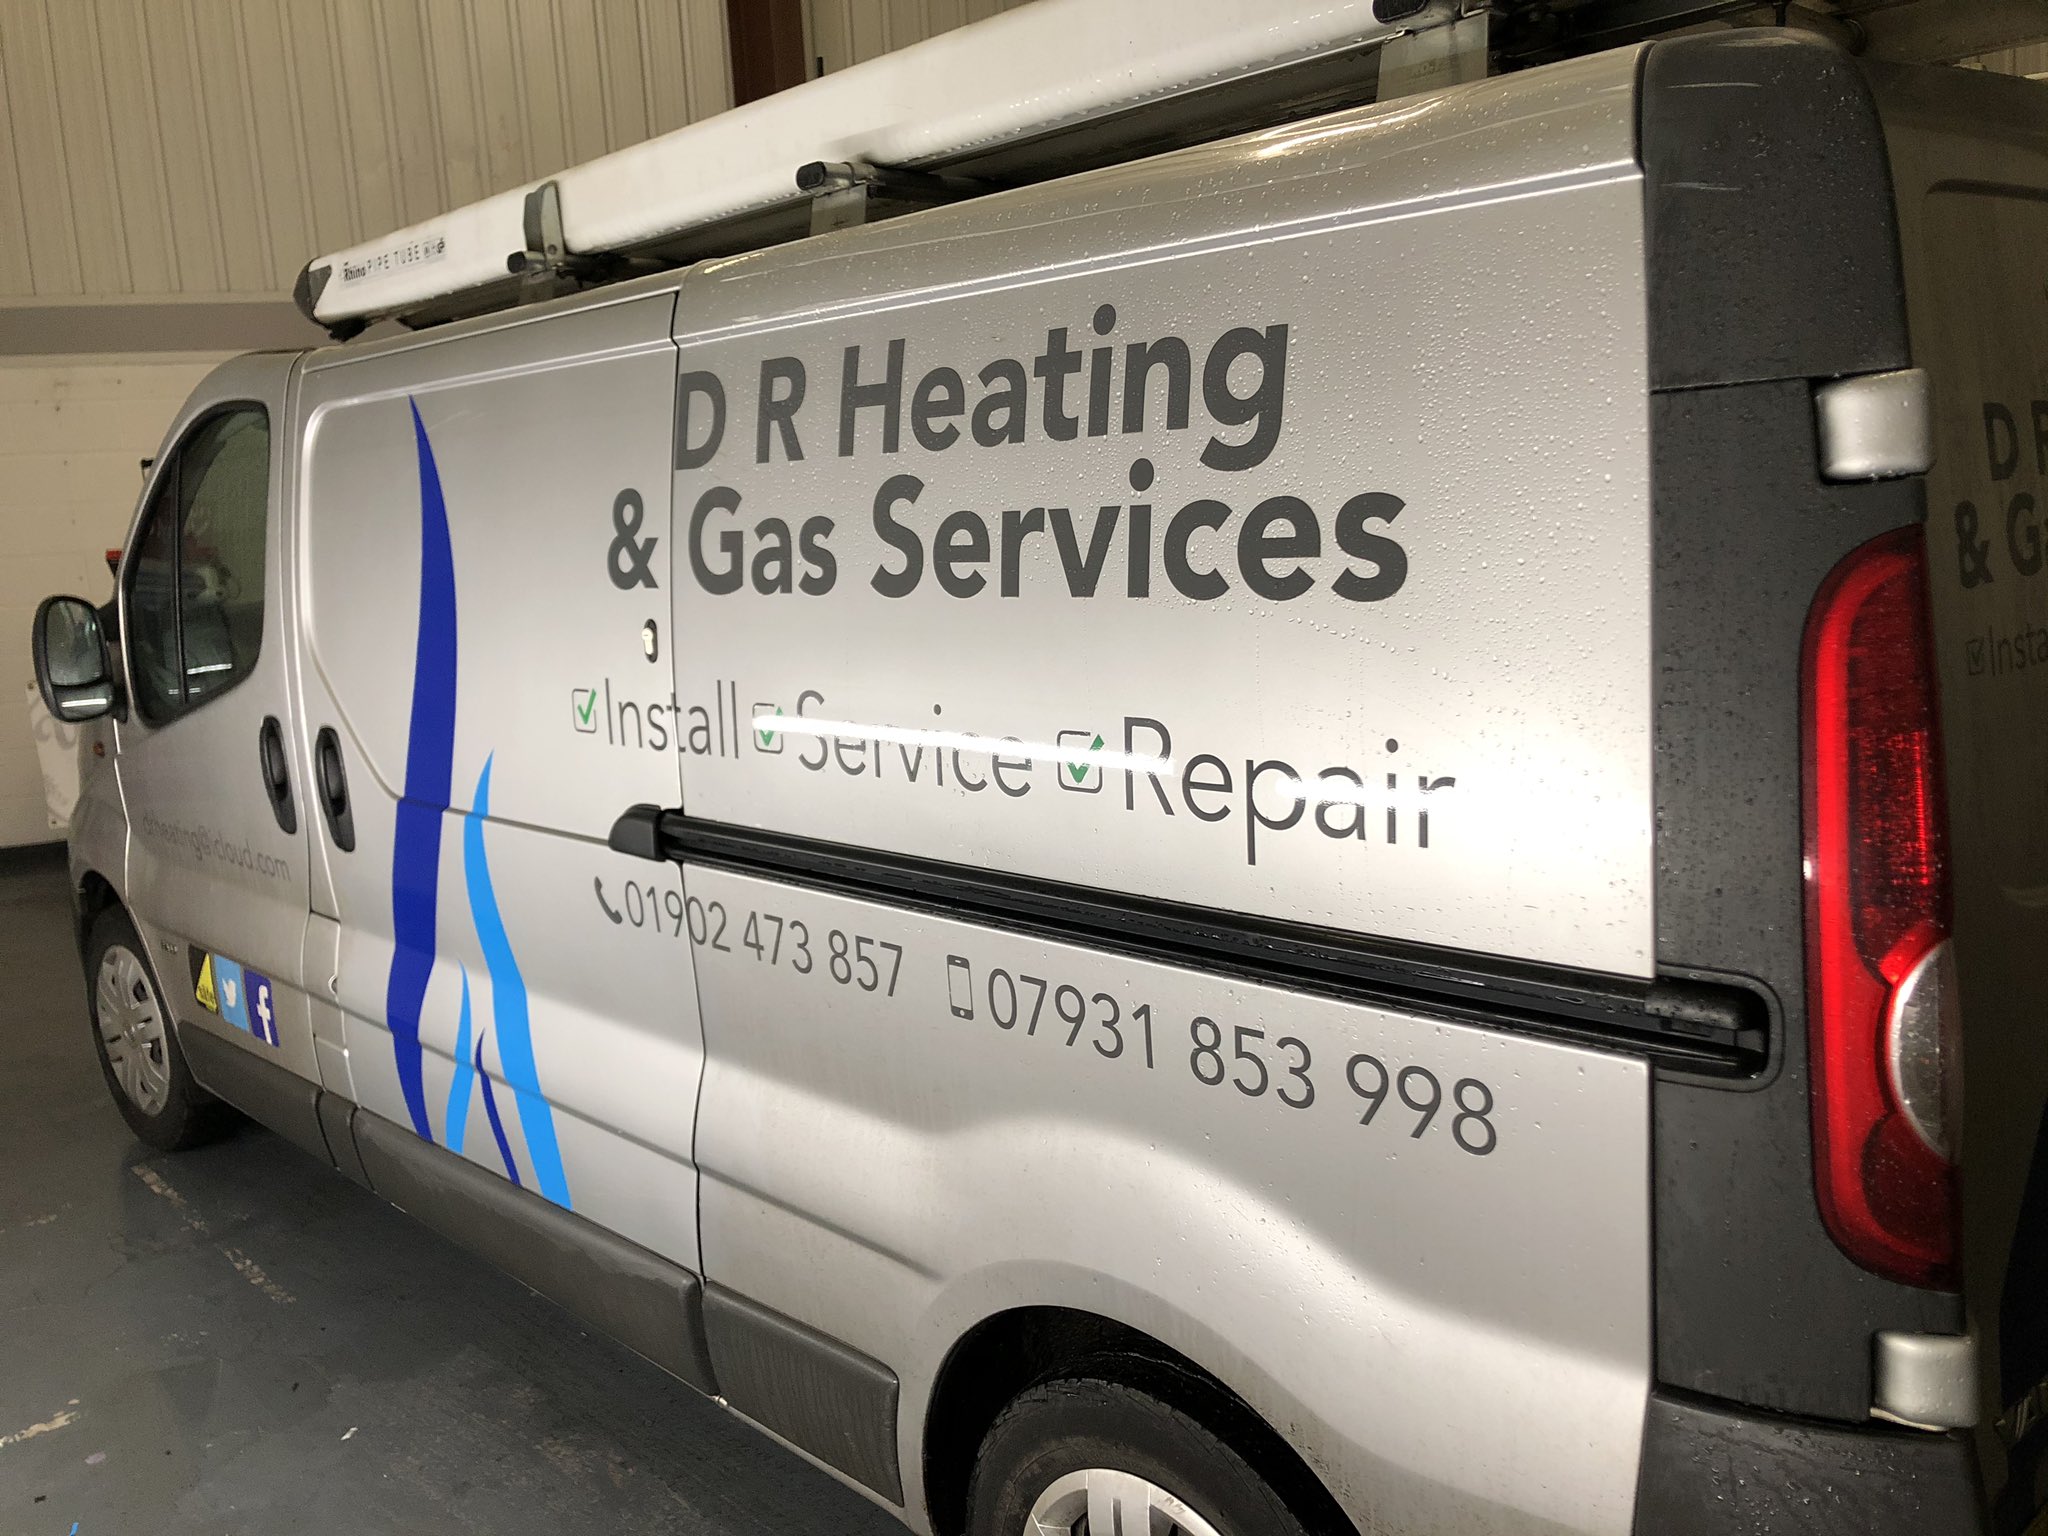 ABC Heating Services